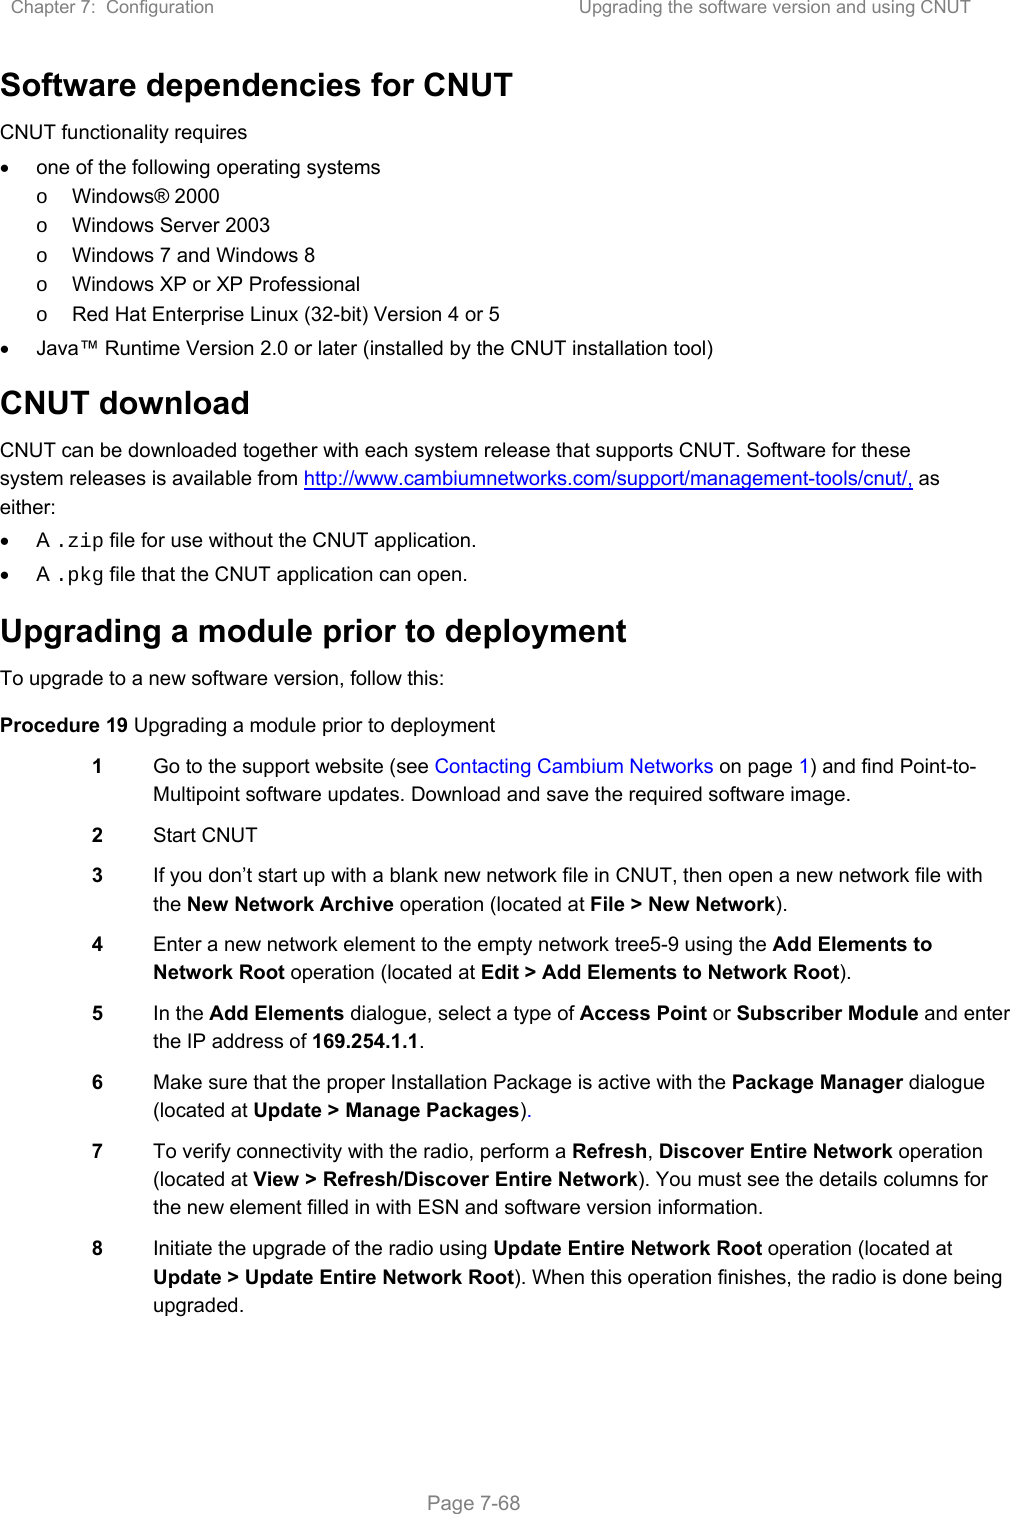 Chapter 7:  Configuration  Upgrading the software version and using CNUT   Page 7-68 Software dependencies for CNUT CNUT functionality requires   one of the following operating systems o  Windows® 2000 o  Windows Server 2003 o  Windows 7 and Windows 8 o  Windows XP or XP Professional o  Red Hat Enterprise Linux (32-bit) Version 4 or 5   Java™ Runtime Version 2.0 or later (installed by the CNUT installation tool) CNUT download CNUT can be downloaded together with each system release that supports CNUT. Software for these system releases is available from http://www.cambiumnetworks.com/support/management-tools/cnut/, as either:  A .zip file for use without the CNUT application.  A .pkg file that the CNUT application can open. Upgrading a module prior to deployment To upgrade to a new software version, follow this: Procedure 19 Upgrading a module prior to deployment 1  Go to the support website (see Contacting Cambium Networks on page 1) and find Point-to-Multipoint software updates. Download and save the required software image. 2  Start CNUT 3  If you don’t start up with a blank new network file in CNUT, then open a new network file with the New Network Archive operation (located at File &gt; New Network). 4  Enter a new network element to the empty network tree5-9 using the Add Elements to Network Root operation (located at Edit &gt; Add Elements to Network Root). 5  In the Add Elements dialogue, select a type of Access Point or Subscriber Module and enter the IP address of 169.254.1.1. 6  Make sure that the proper Installation Package is active with the Package Manager dialogue (located at Update &gt; Manage Packages). 7  To verify connectivity with the radio, perform a Refresh, Discover Entire Network operation (located at View &gt; Refresh/Discover Entire Network). You must see the details columns for the new element filled in with ESN and software version information. 8  Initiate the upgrade of the radio using Update Entire Network Root operation (located at Update &gt; Update Entire Network Root). When this operation finishes, the radio is done being upgraded. 